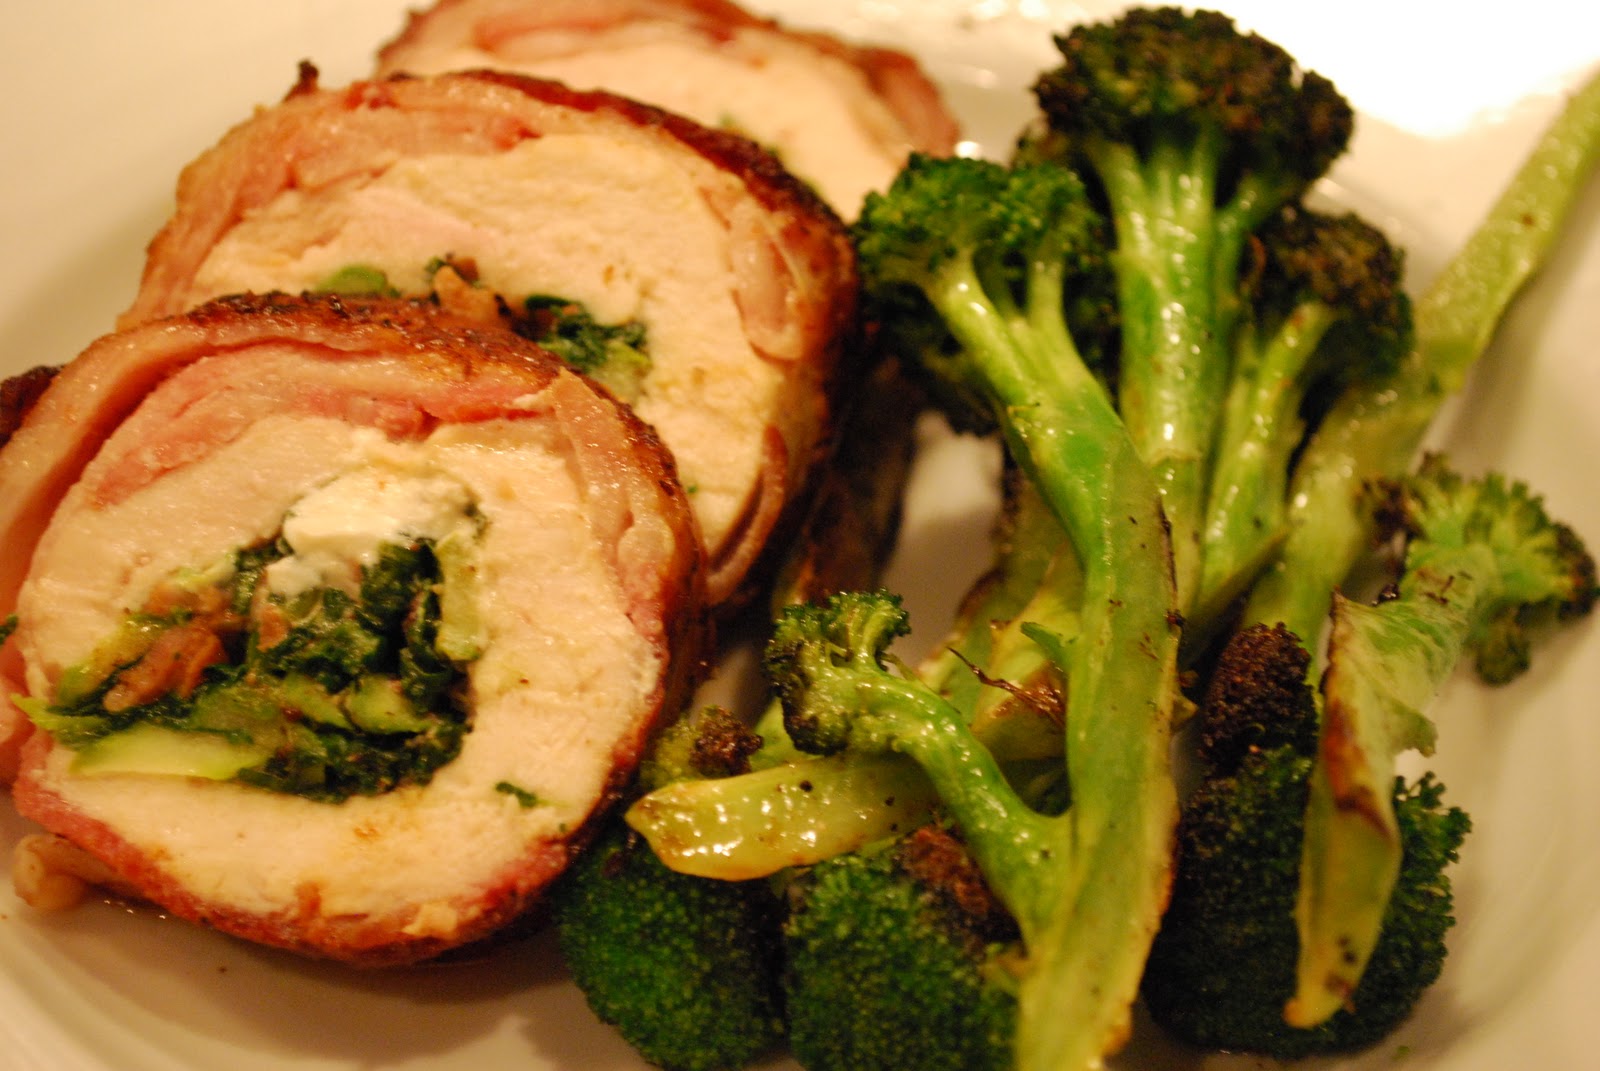 Jen's Gone Paleo: Wrapped and Stuffed Chicken Breast